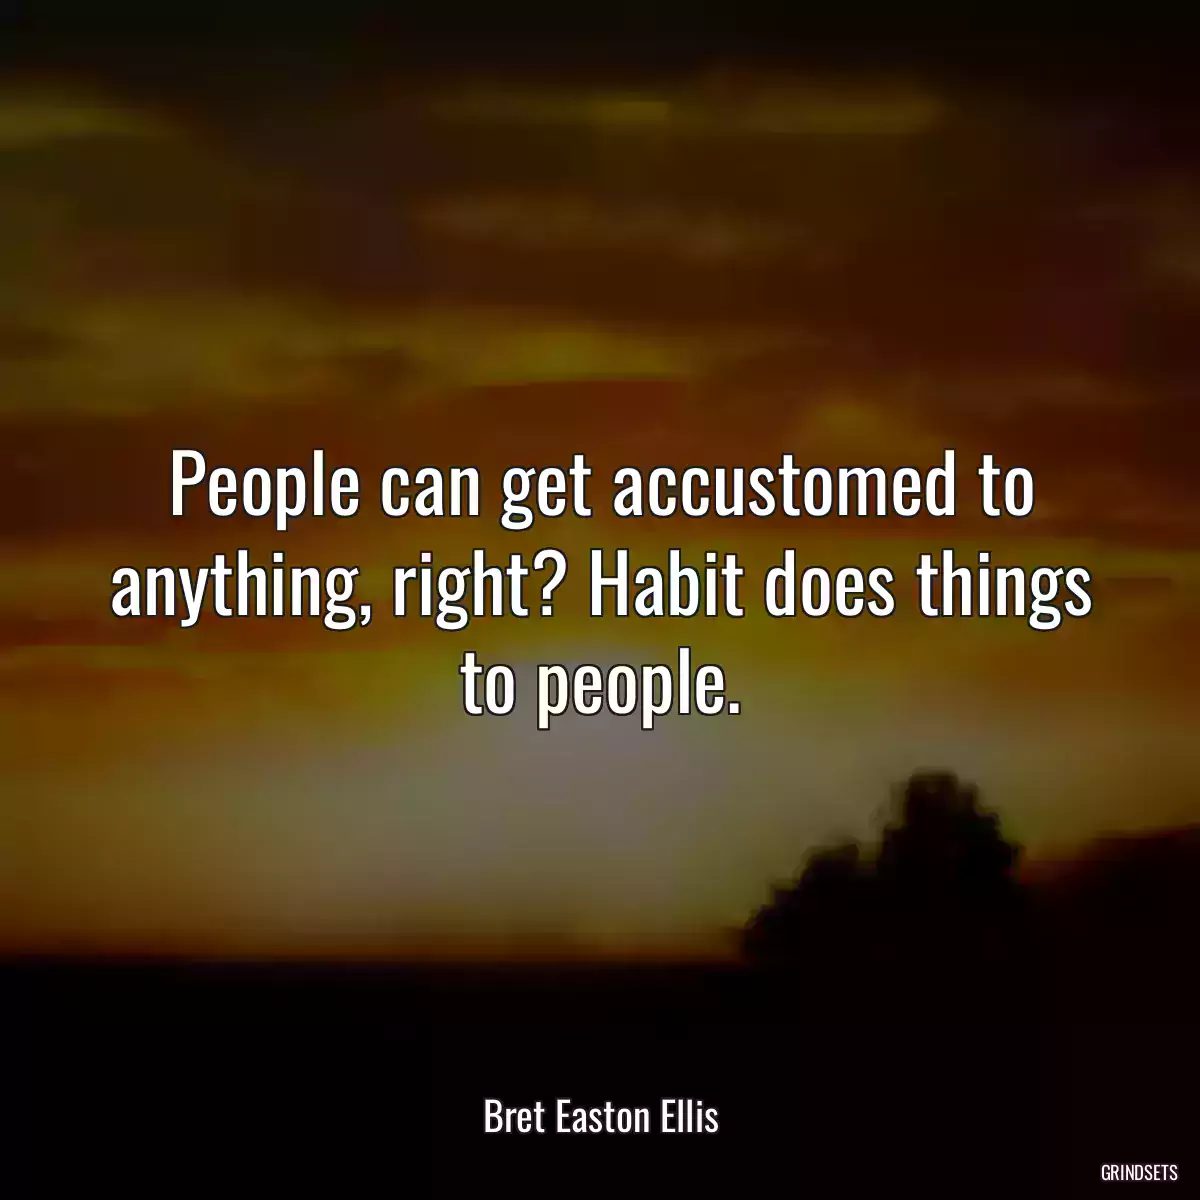 People can get accustomed to anything, right? Habit does things to people.